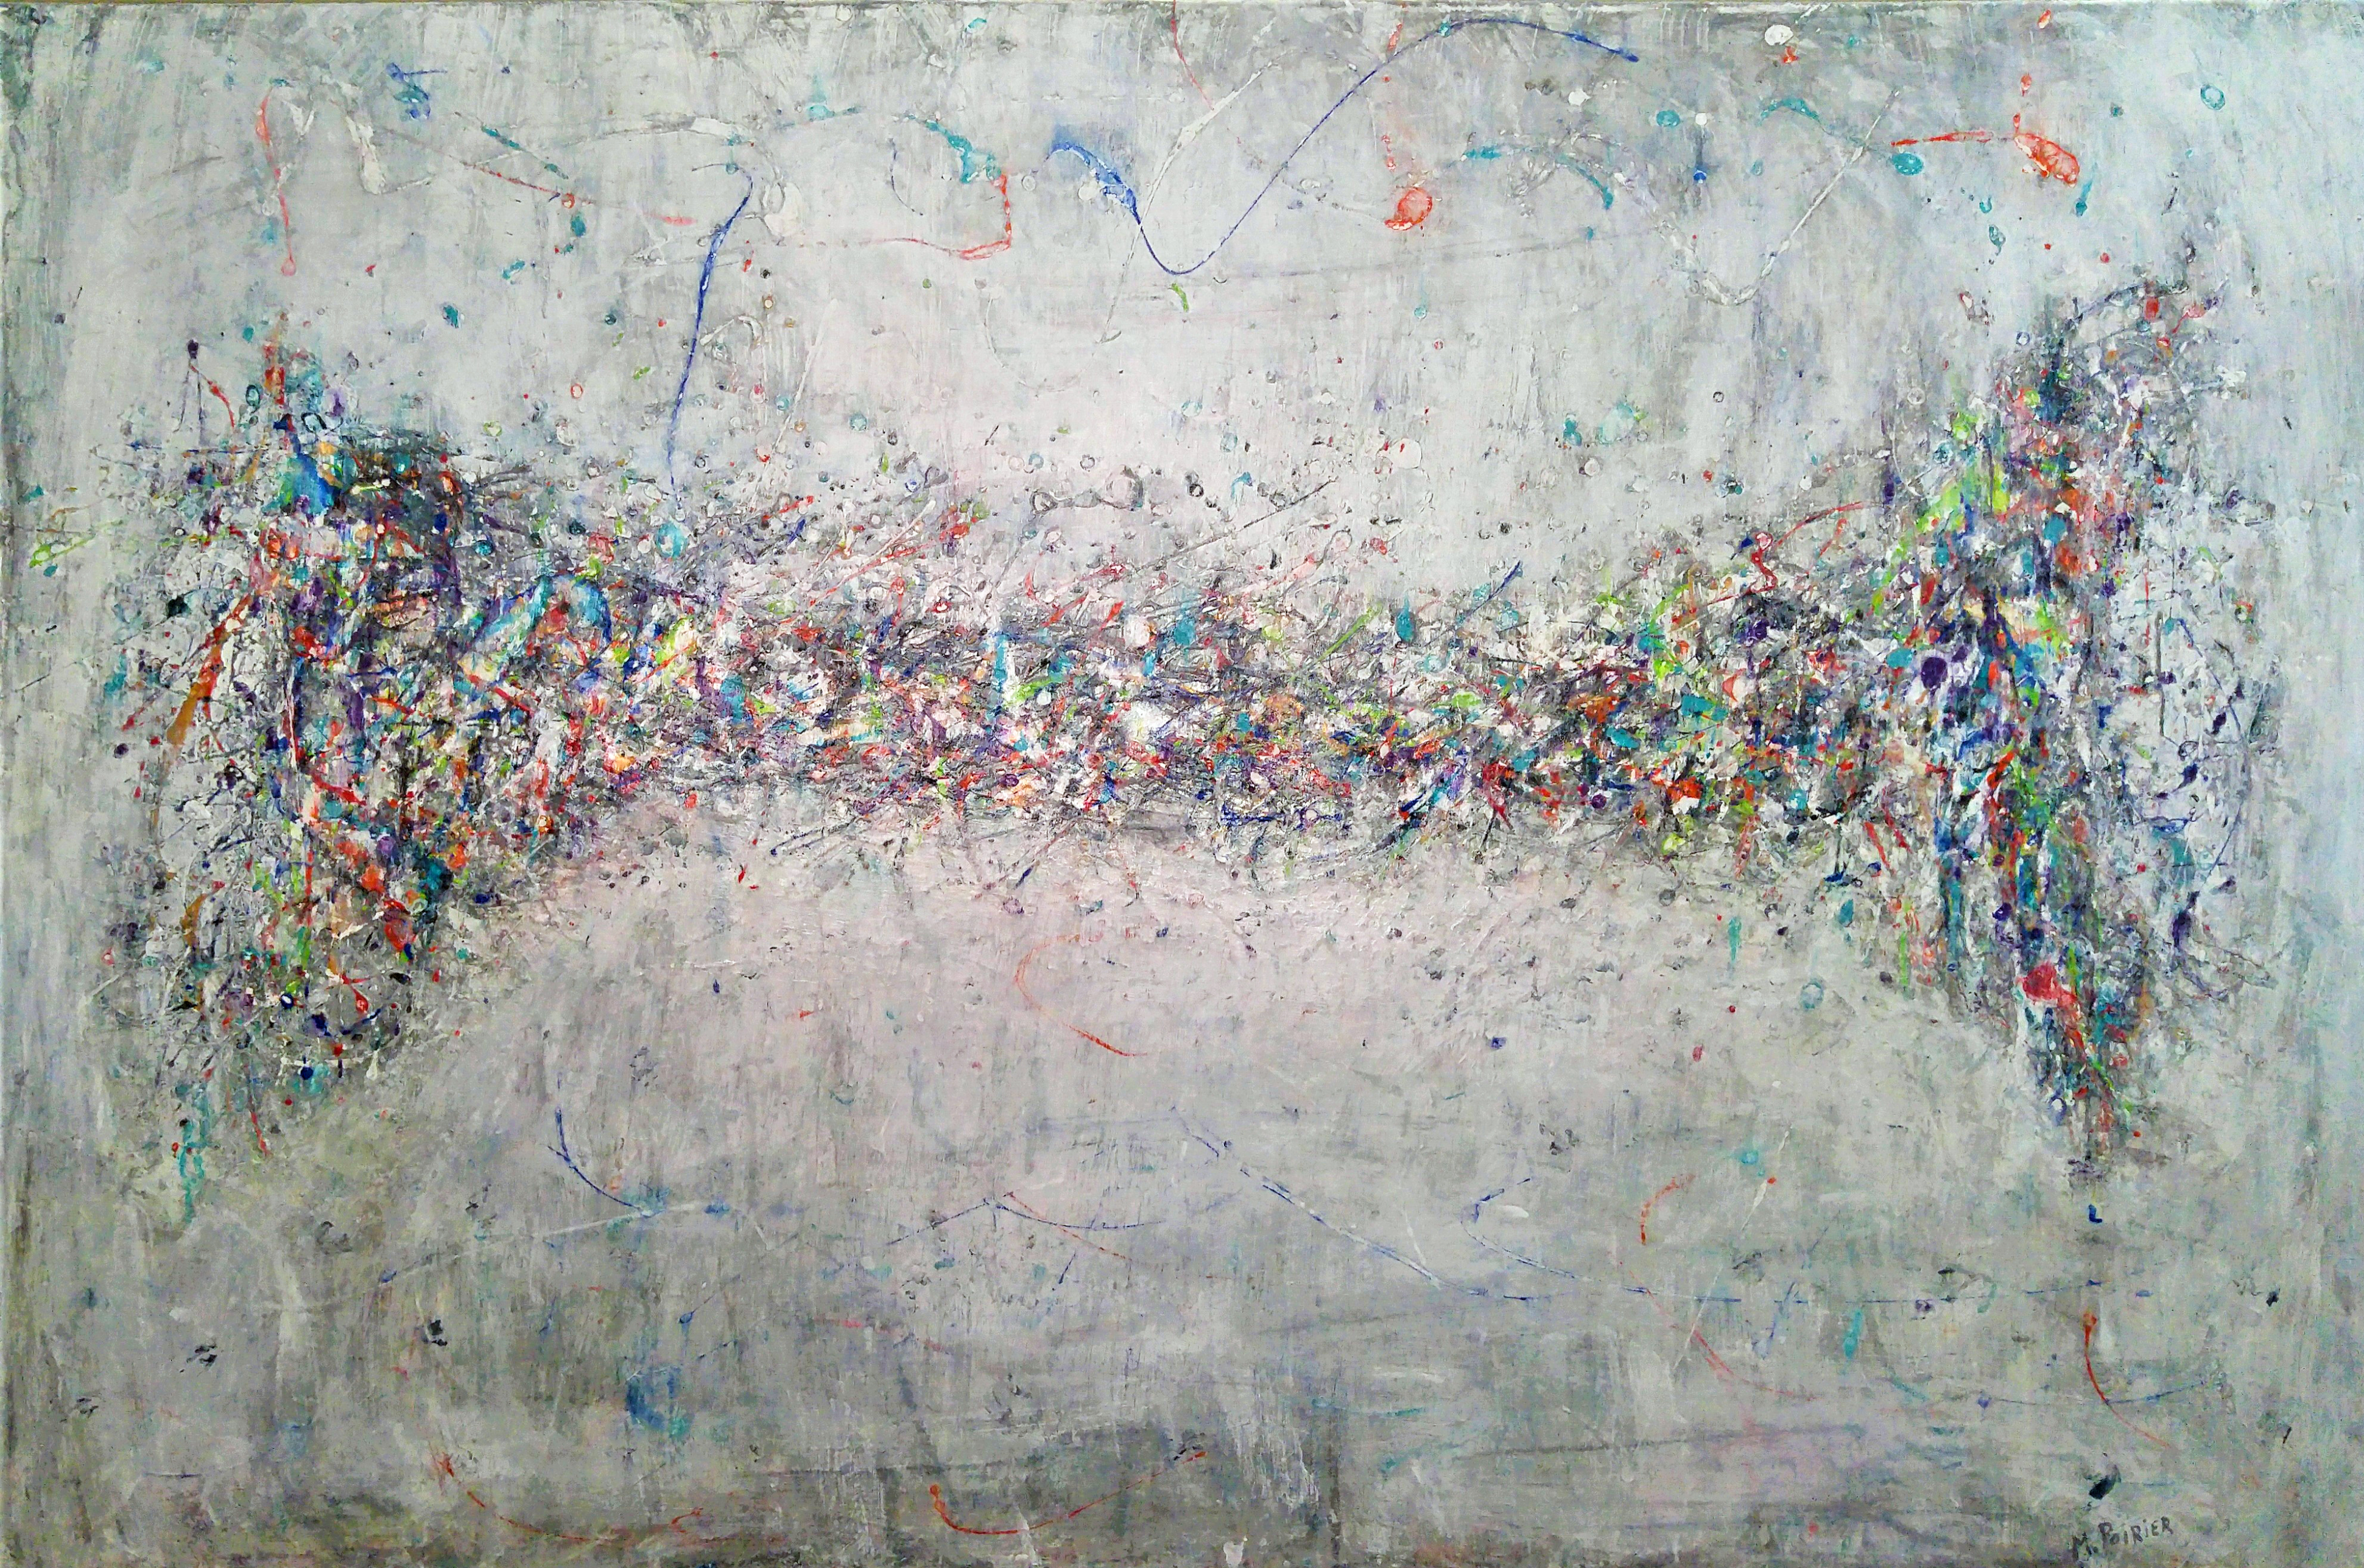 THE ARRIVAL
60x40 inches, 152x102 centimeters